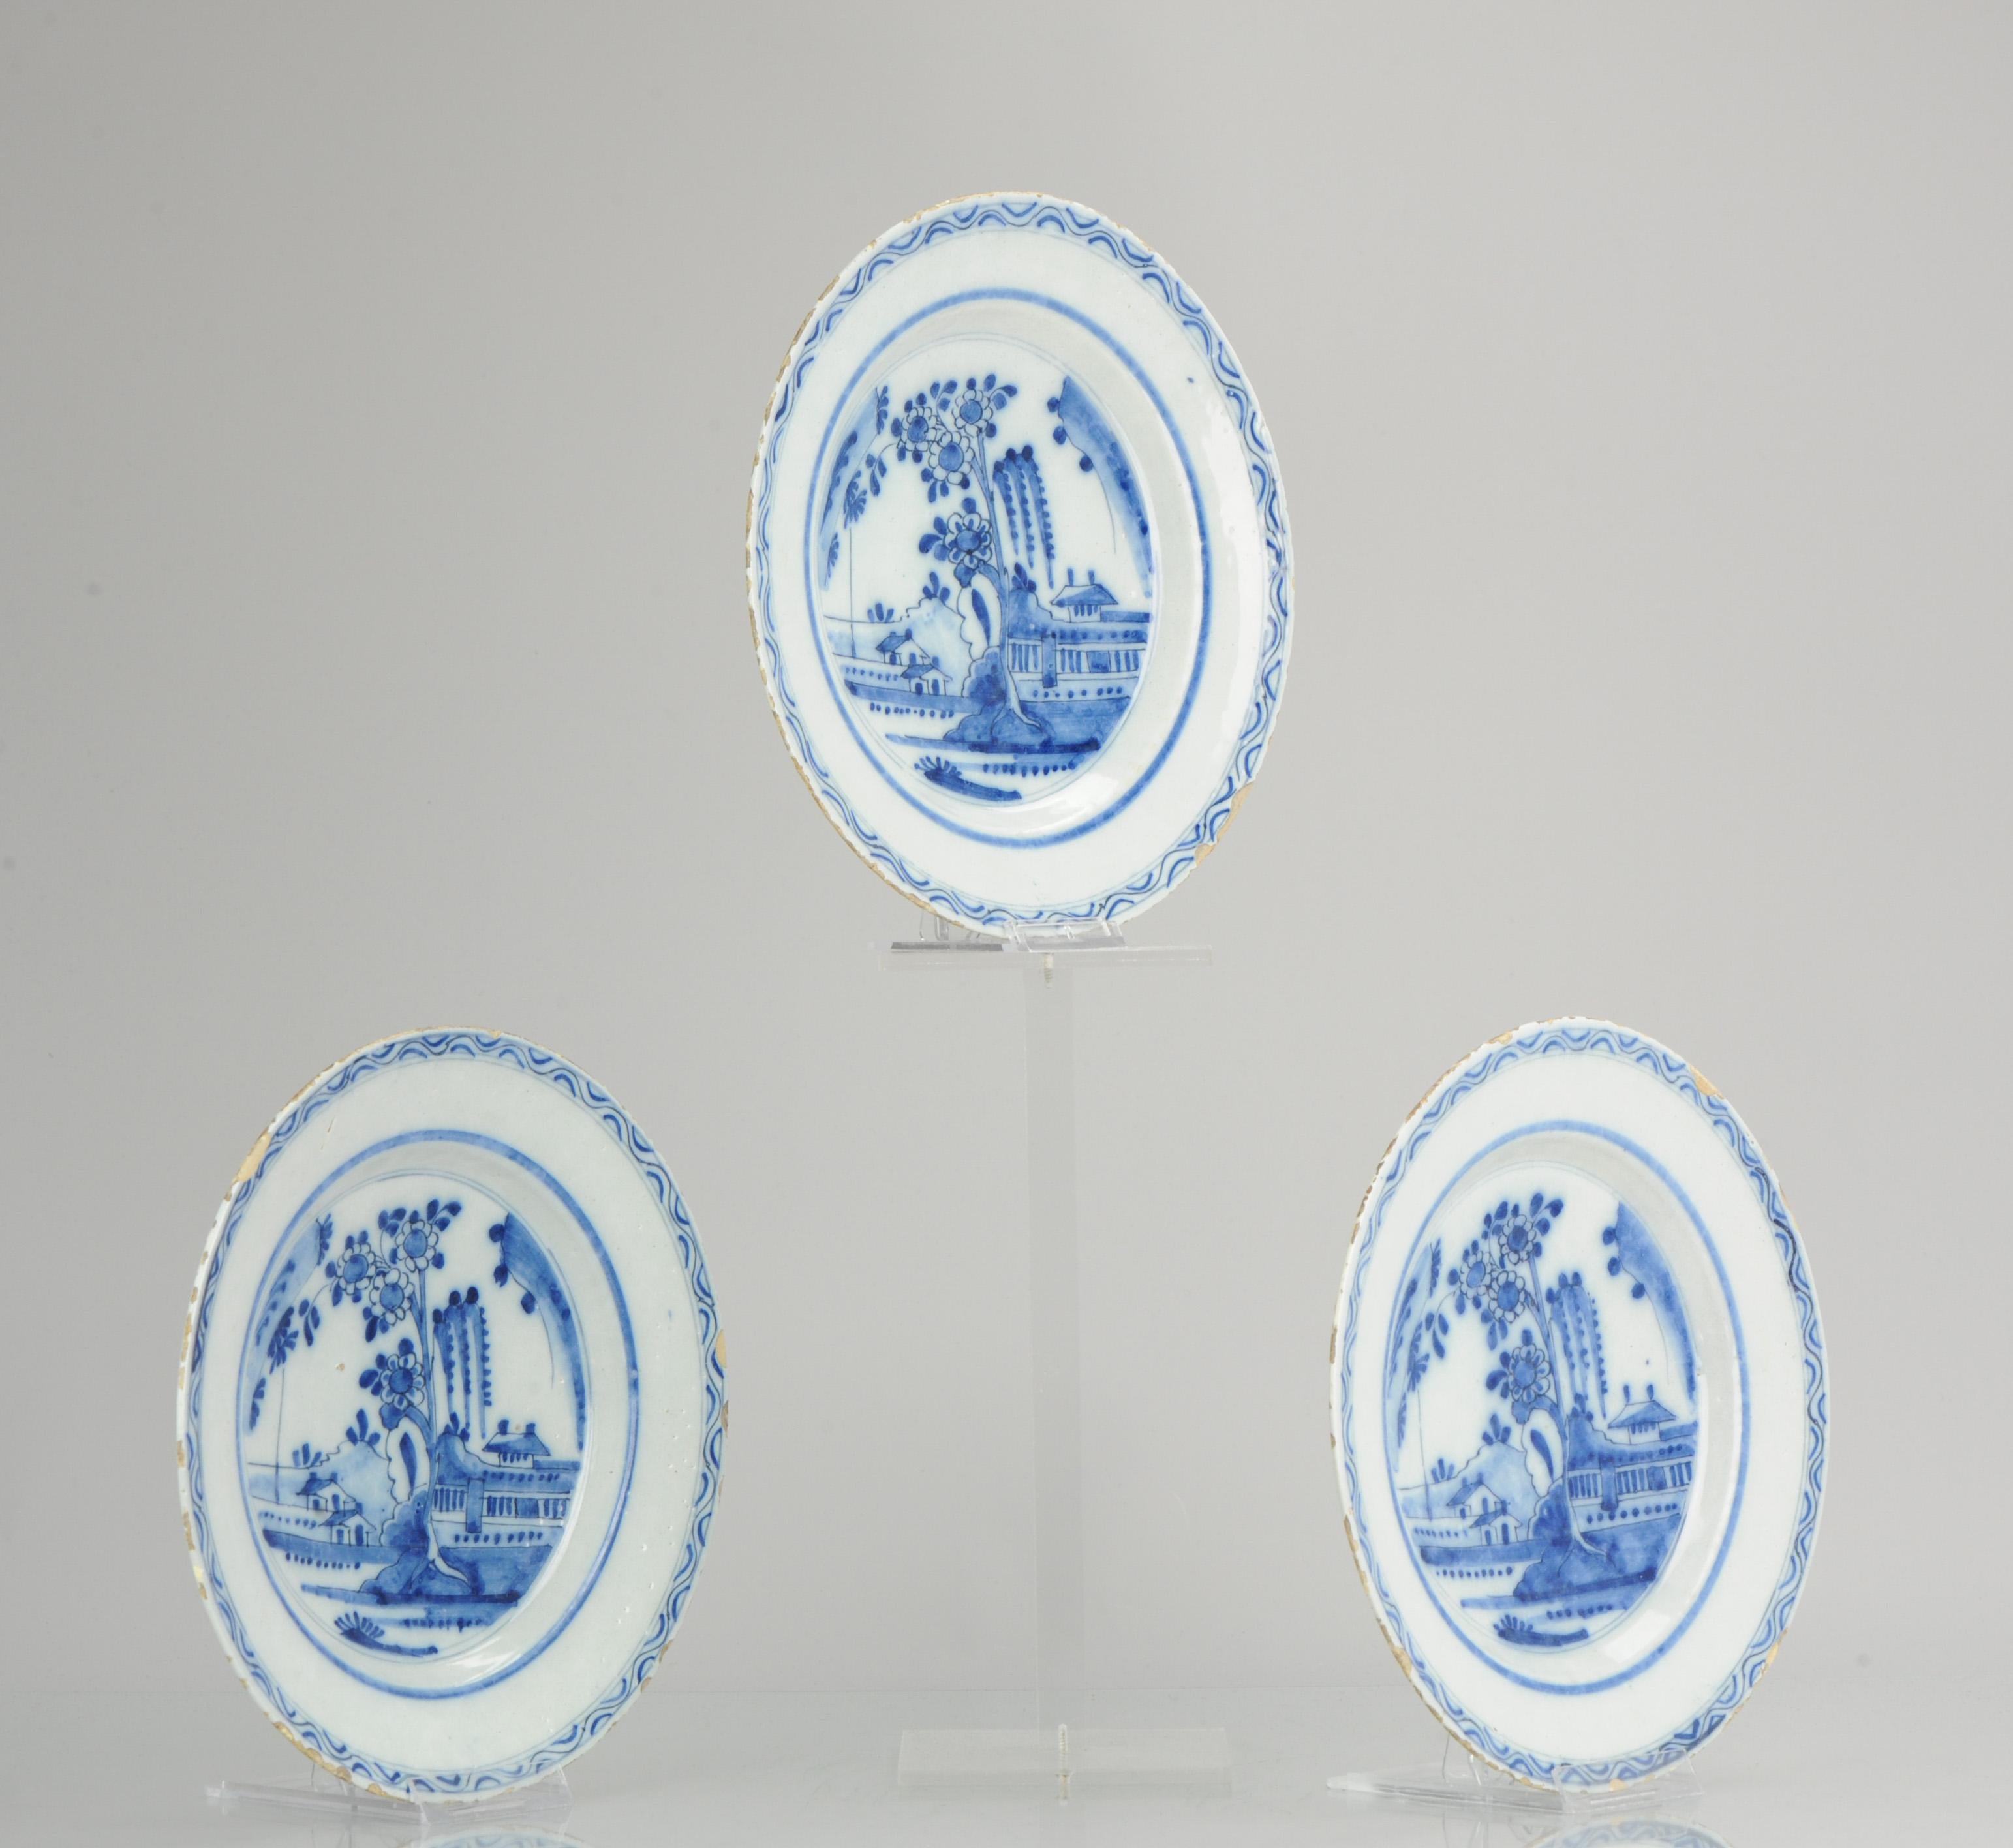 Very cool 17/18C Delft Porcelain plates with hand painted decoration. Inspired on Chinese pieces from the same period. Very interesting scene of a garden landscape with houses & Scholarsrock.

Additional information:
Material: Overall Condition; The